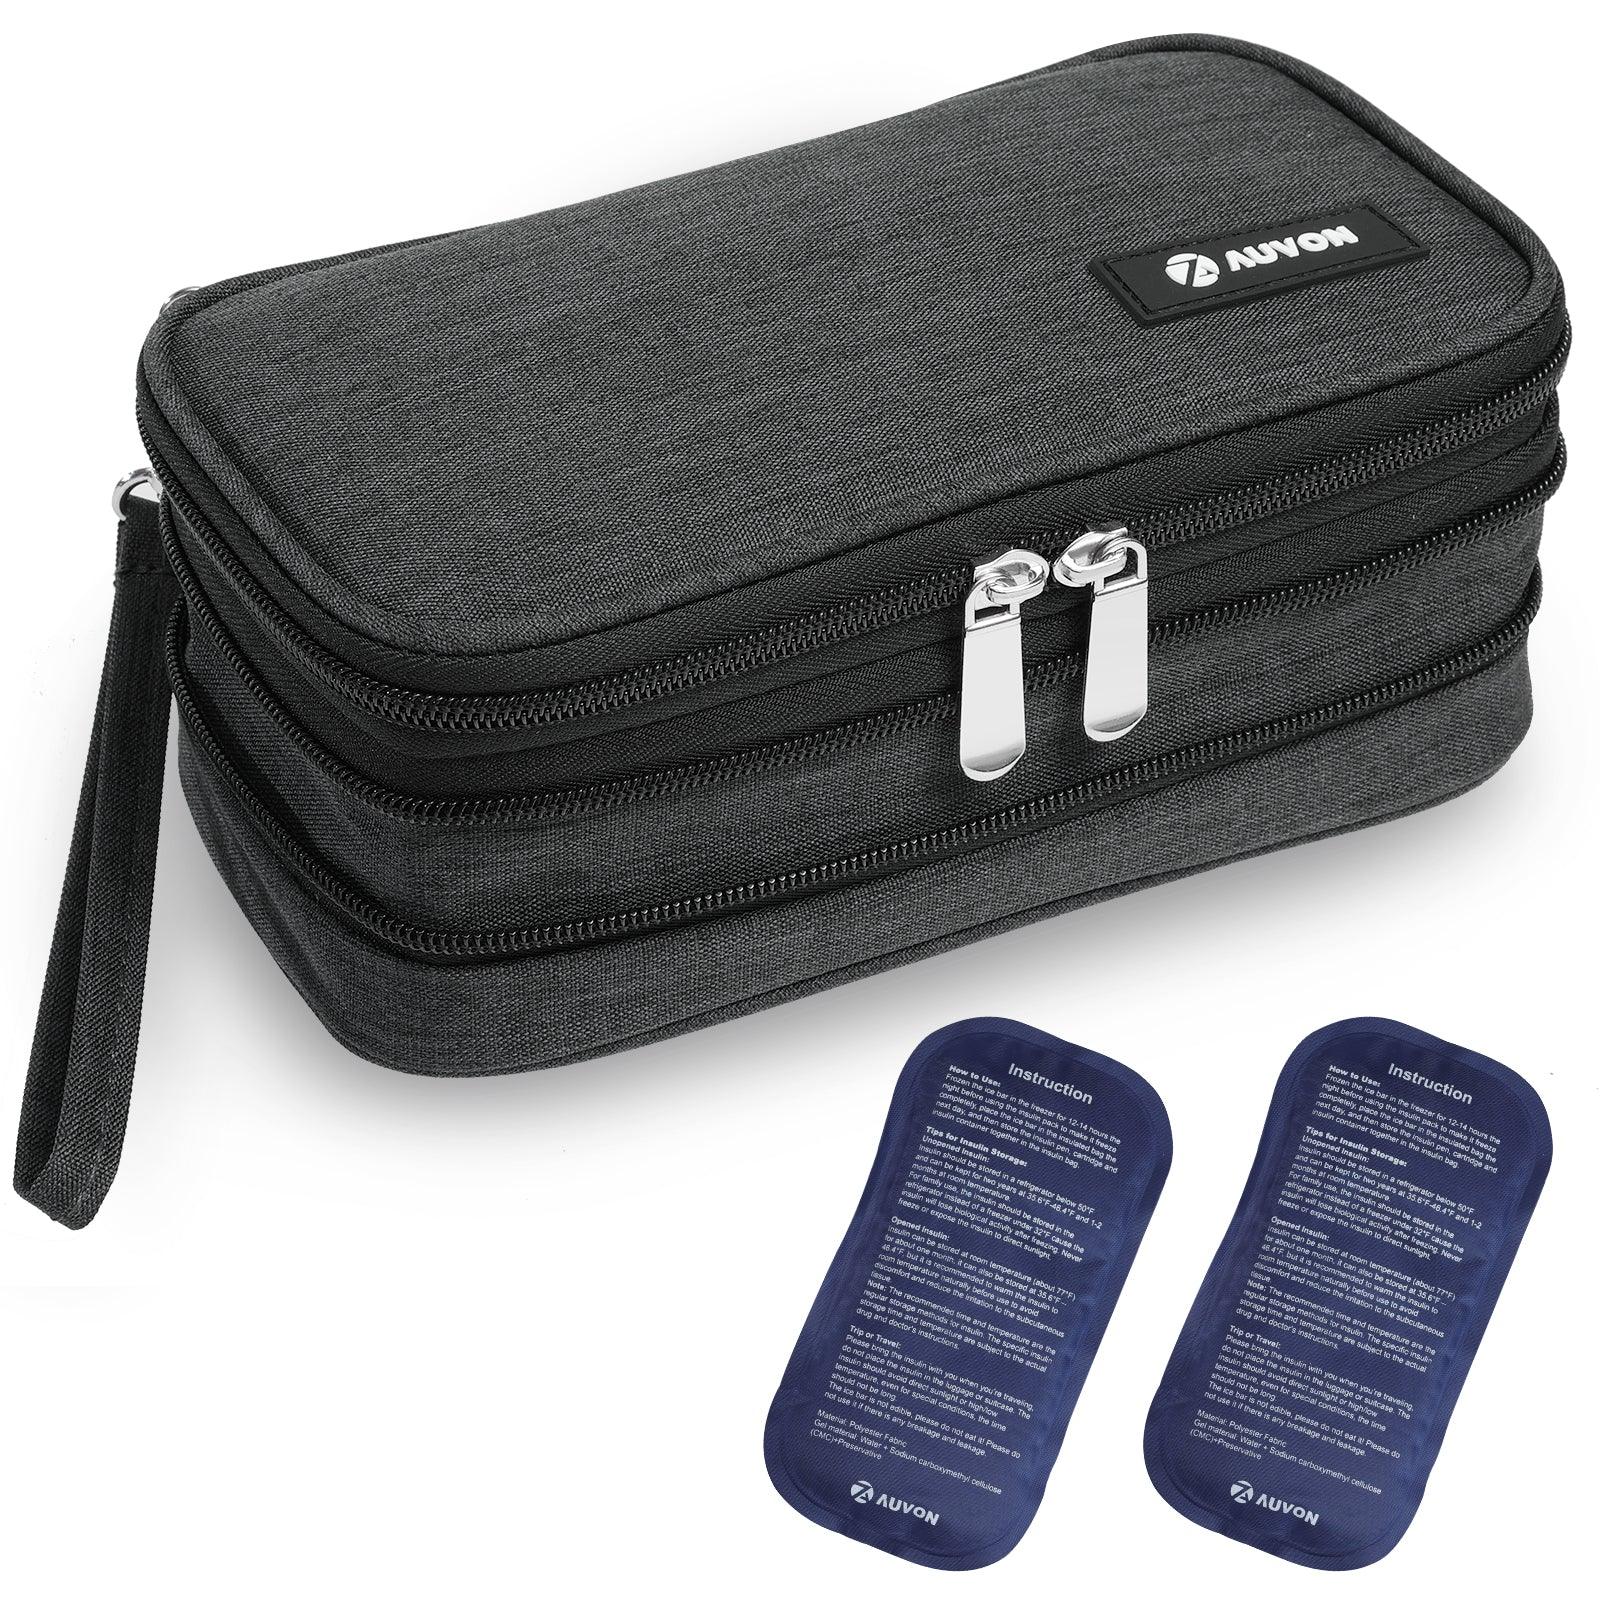 http://auvonhealth.com/cdn/shop/files/auvon-insulin-cooler-travel-case-expandable-insulated-diabetic-bag-with-2-180g-ice-packs-for-double-cooling-time-portable-medication-cooler-bag-for-insulin-pens-and-blood-glucose-moni_82da1e5a-717b-4fbc-8b55-433ccc314383.jpg?v=1686019875